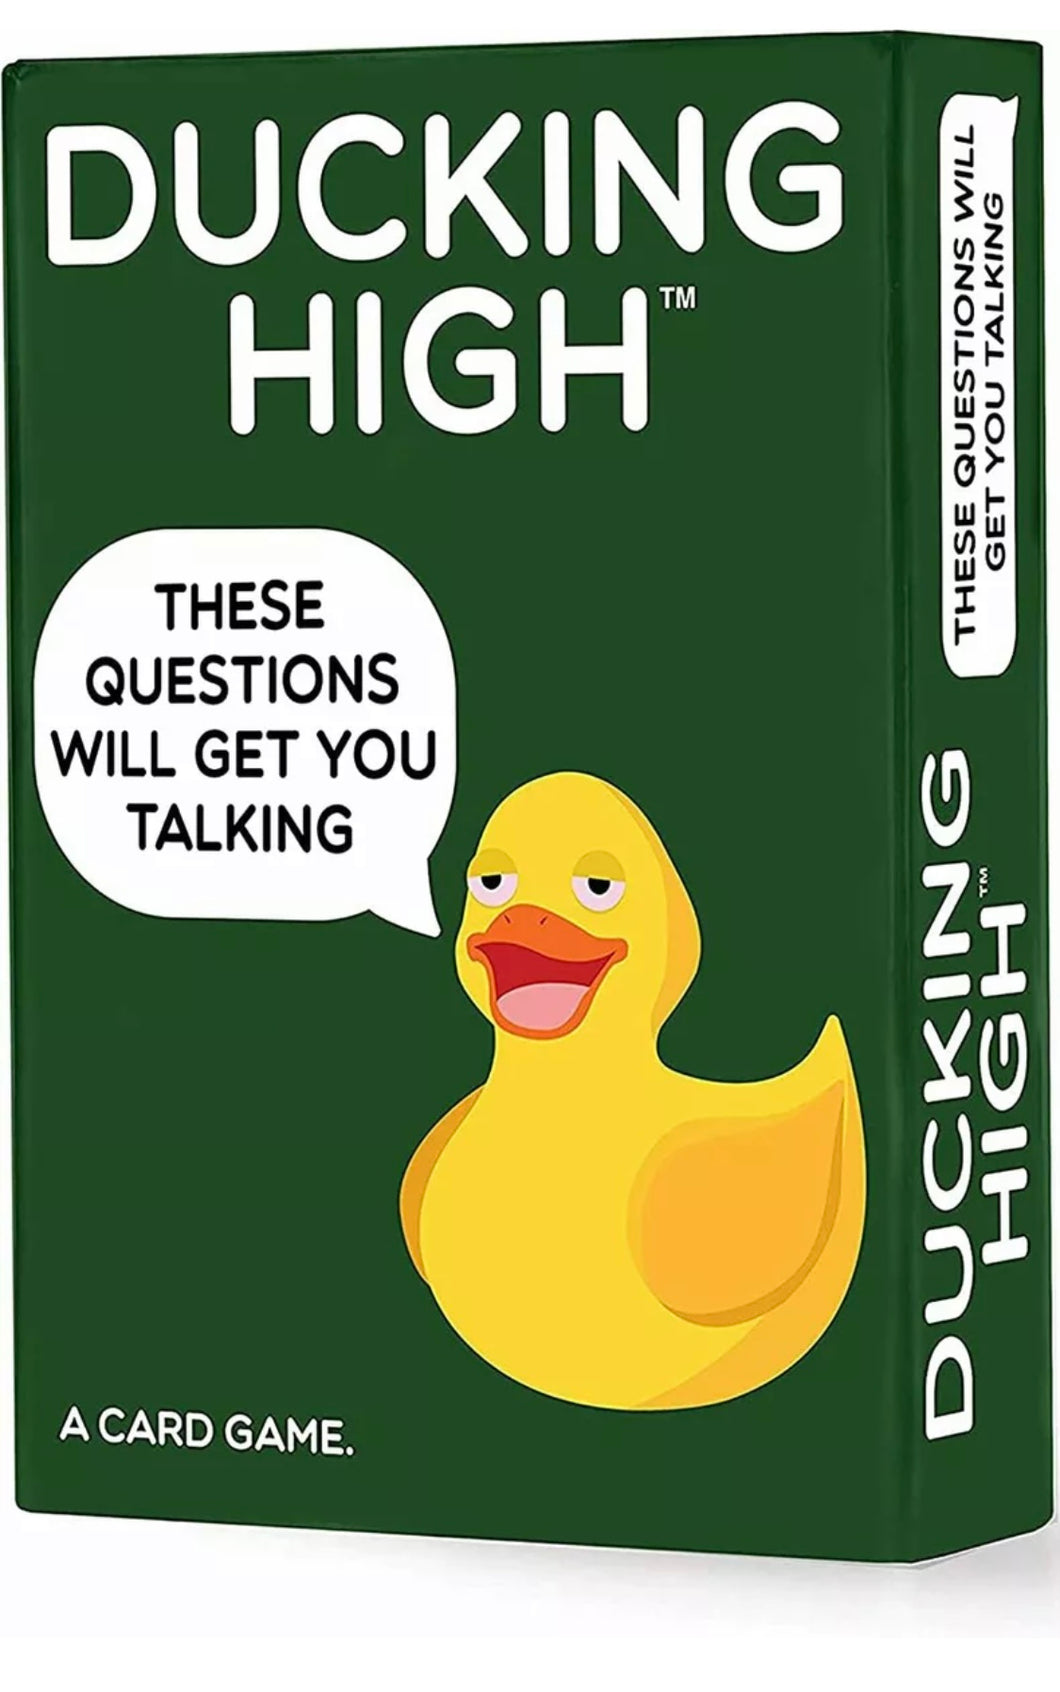 Ducking High game - NEW